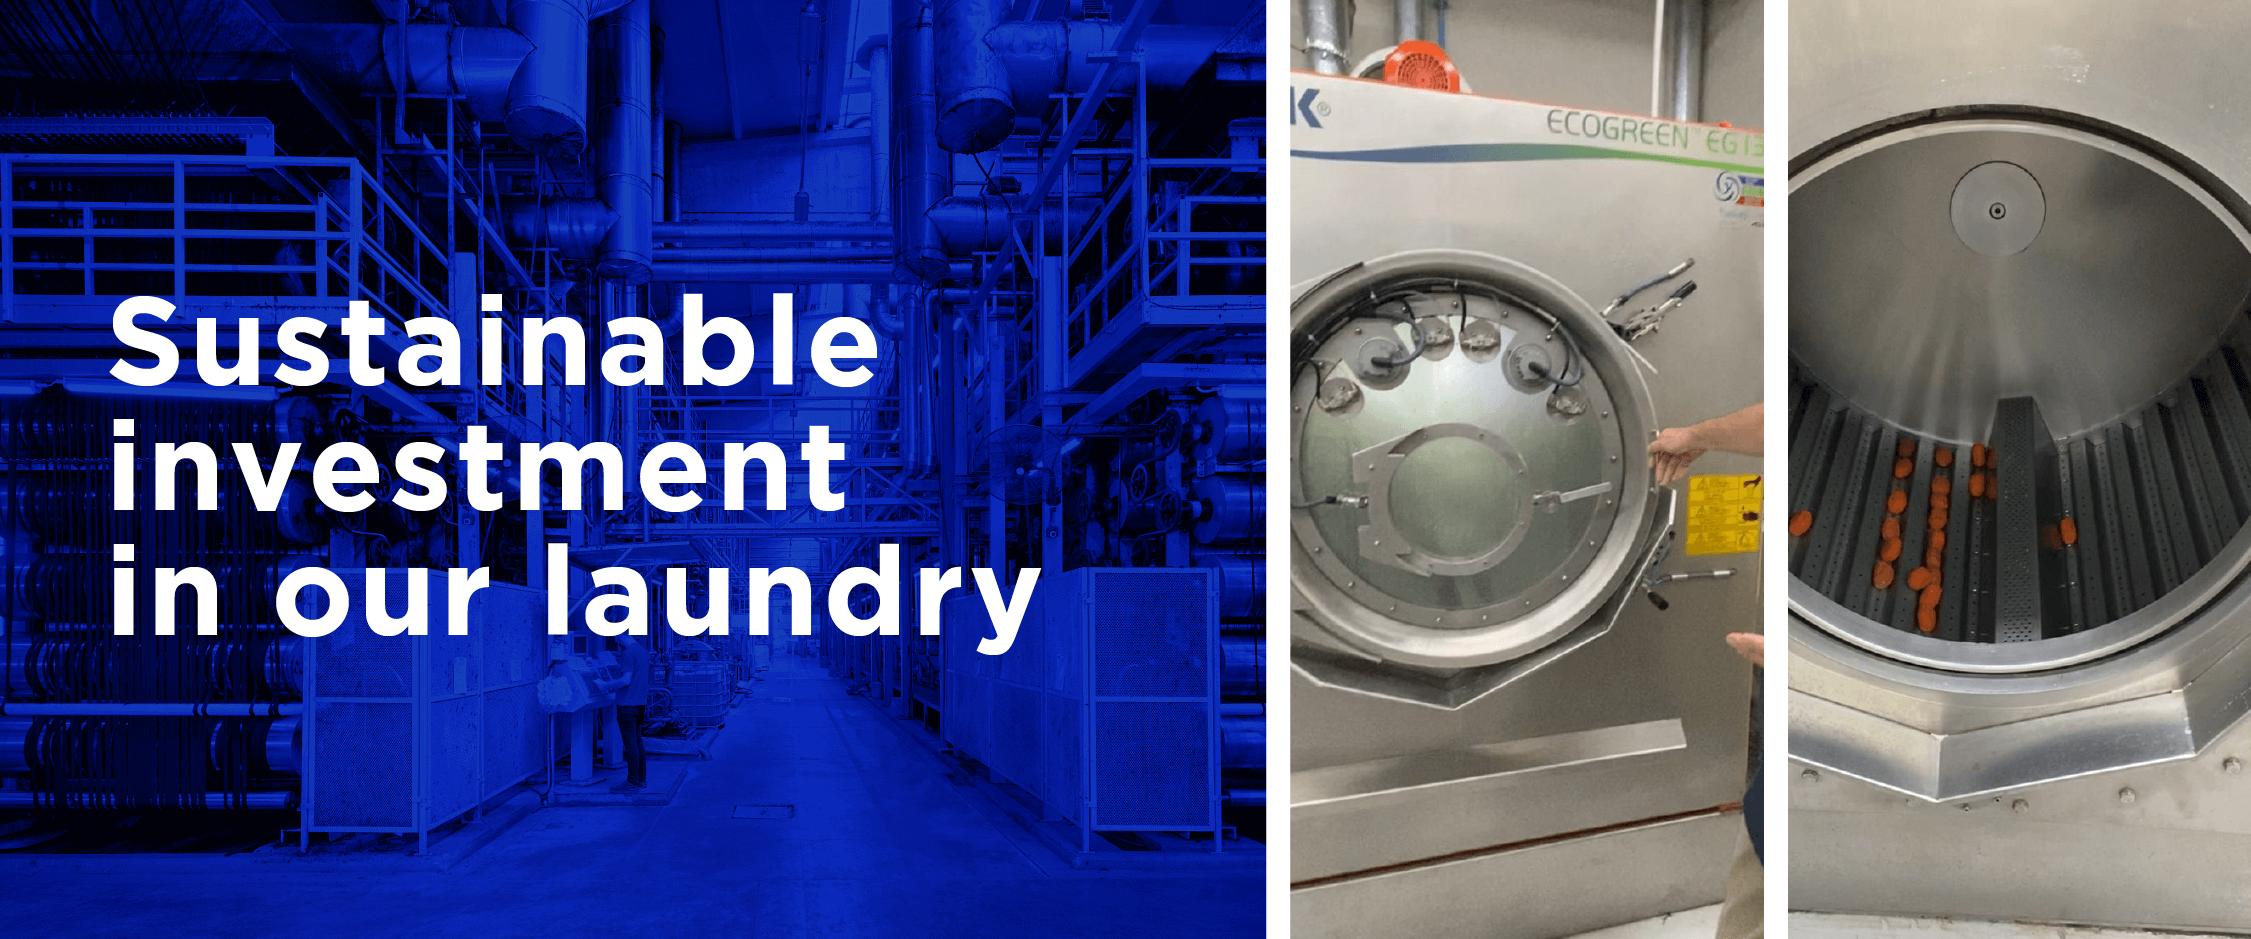 Our Laundry is Sustainable Now